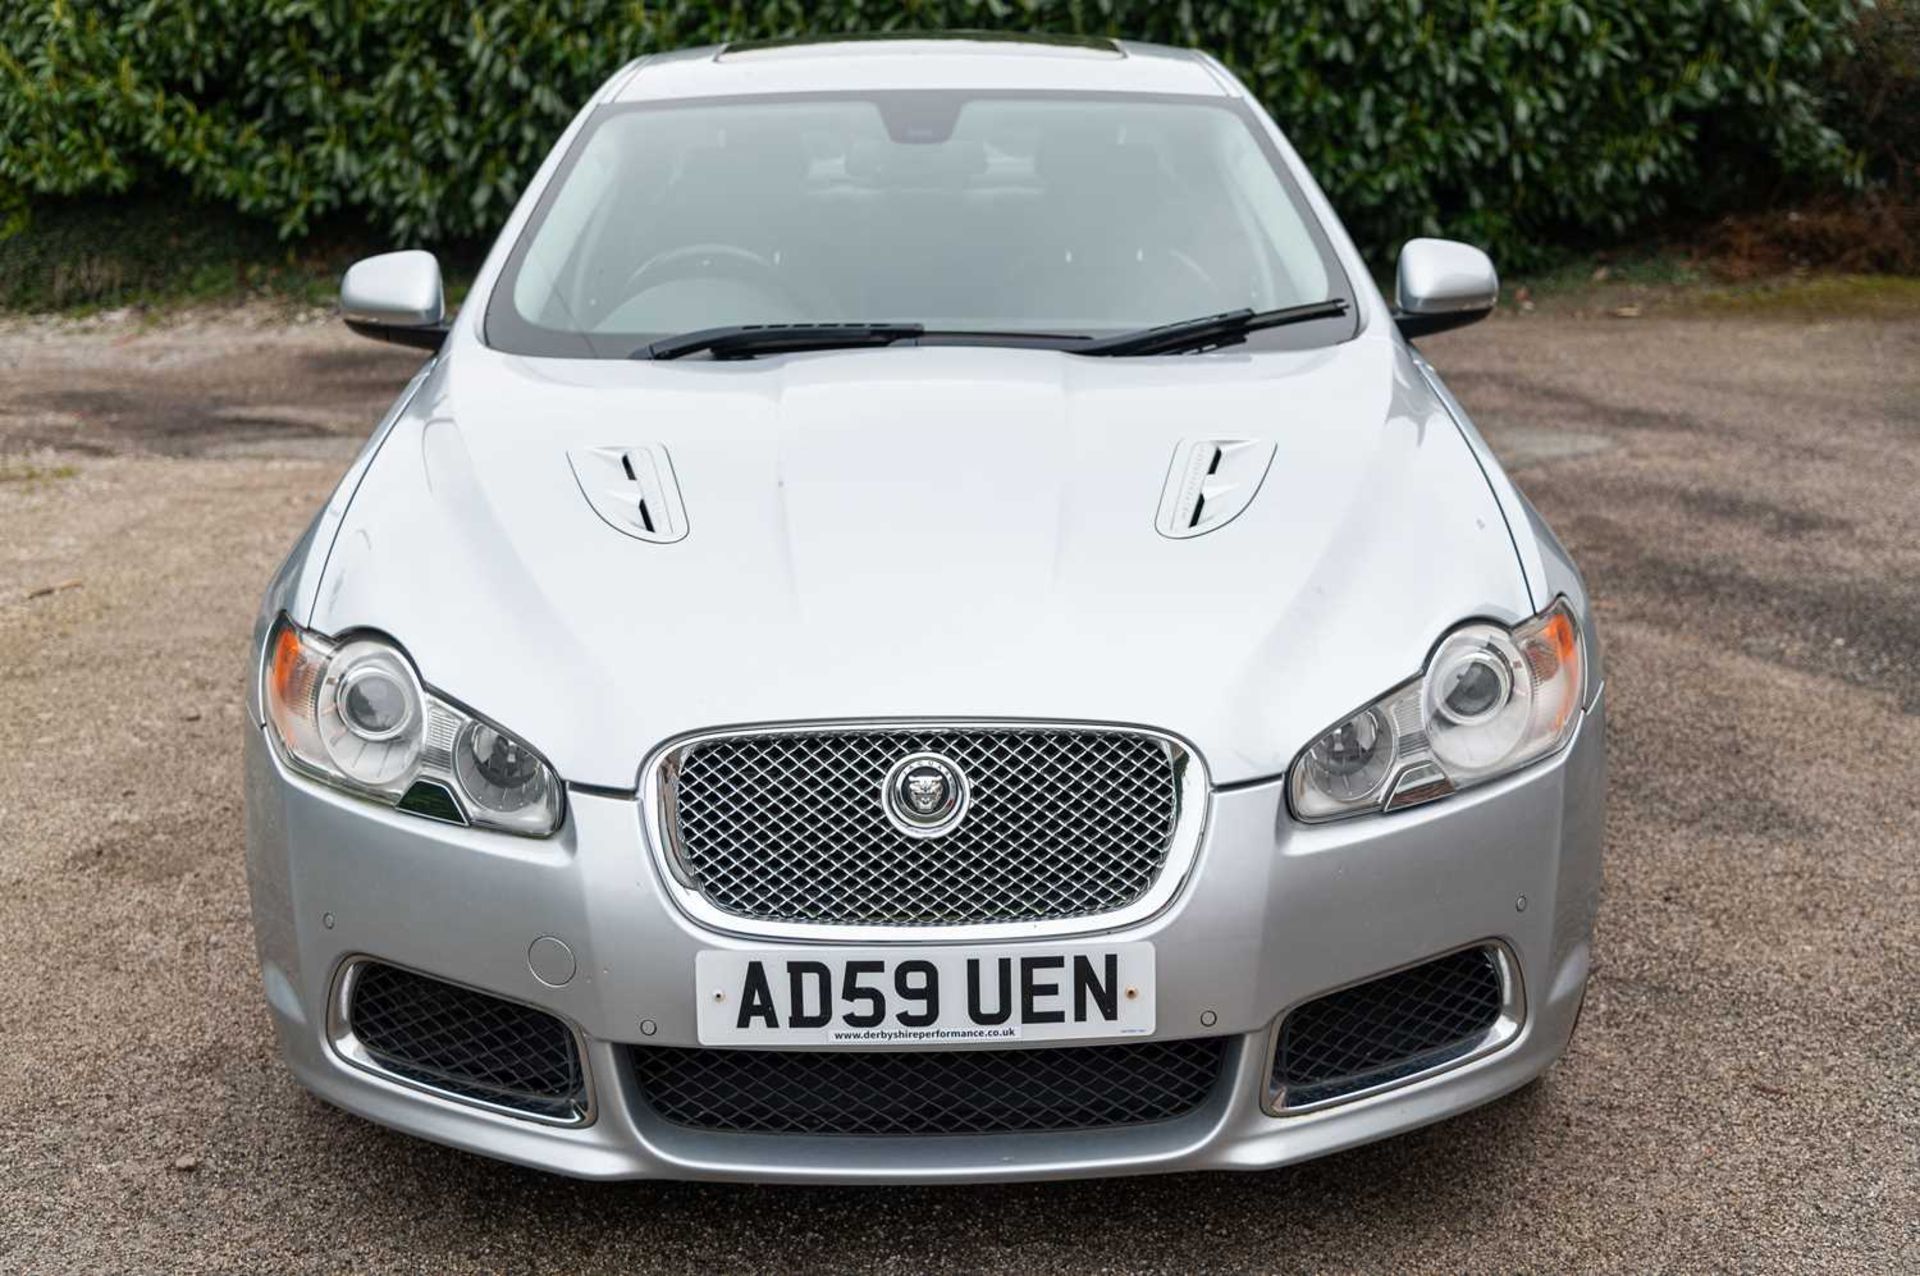 2009 Jaguar XFR Saloon 500 horsepower four-door super saloon, with full service history - Image 3 of 81